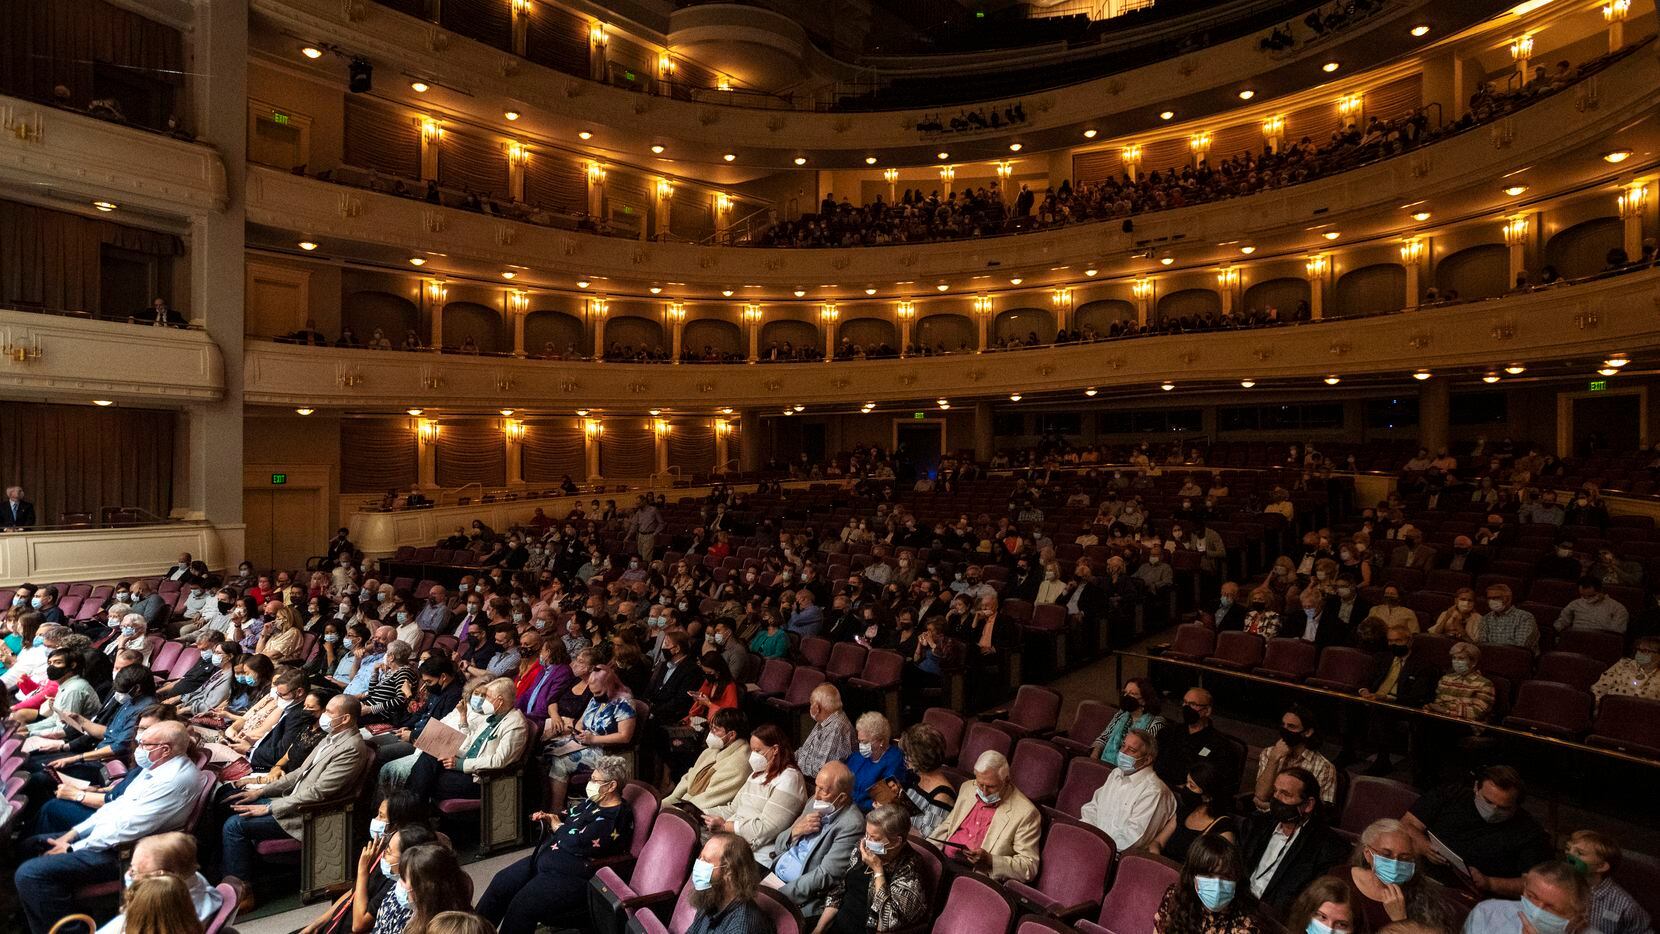 The audience at The Fort Worth Symphony Orchestra's concert on Sept. 17, 2021, at the Bass Performance Hall in downtown Fort Worth.